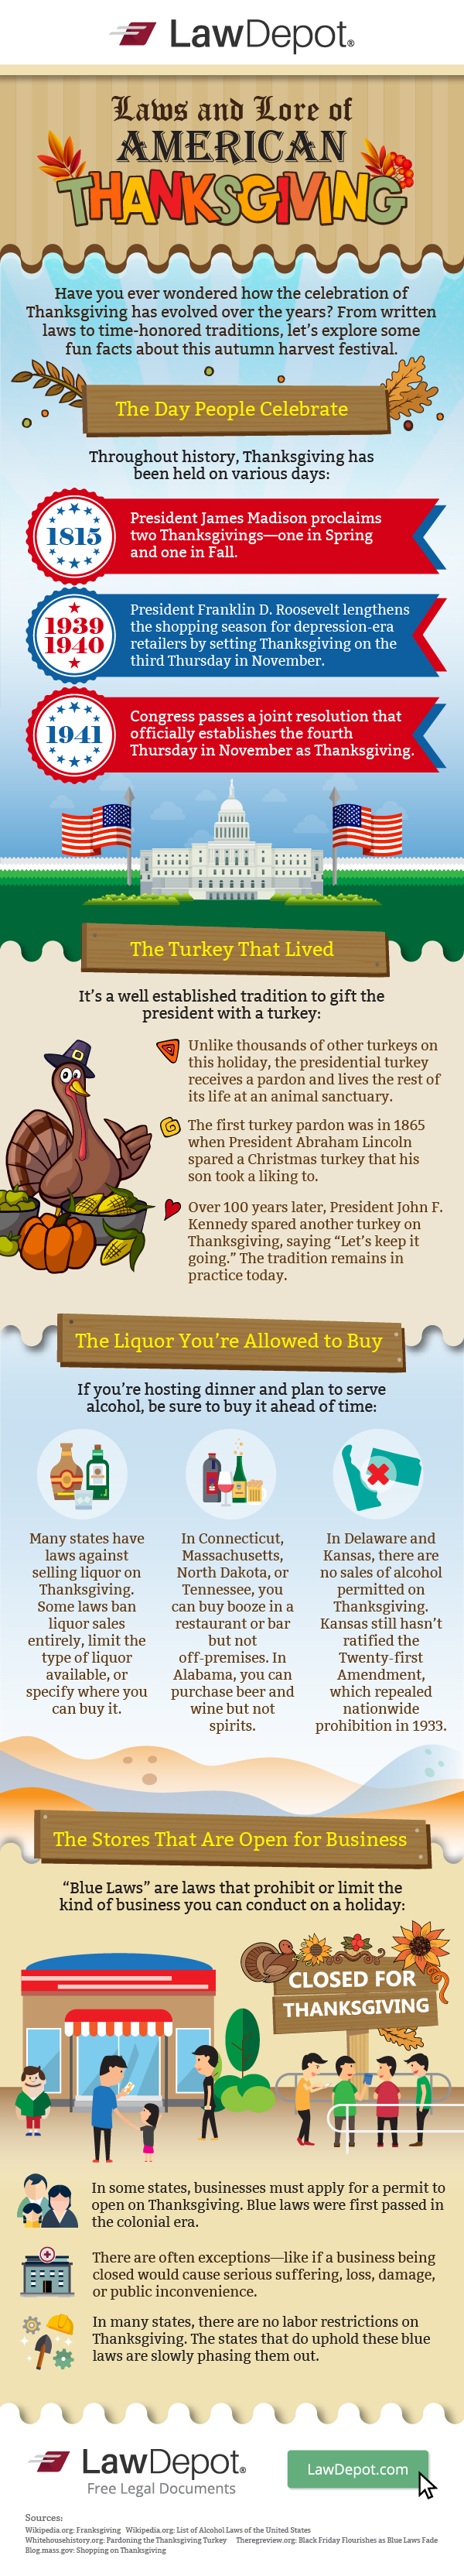 Have you ever wondered how the celebration of Thanksgiving has evolved over the years? From written laws to time-honored traditions, let’s explore some fun facts about this autumn harvest festival. 
The Day People Celebrate
Throughout history, Thanksgiving has been held on various days:
1815: President James Madison proclaims two Thanksgivings—one in spring and one in fall. 
1939-1940: President Franklin D. Roosevelt lengthens the shopping season for depression-era retailers by setting Thanksgiving on the third Thursday in November.
1941: Congress passes a joint resolution that officially establishes the fourth Thursday in November as Thanksgiving. 
The Turkey That Lived
It’s a well-established tradition to gift the president with a turkey: 
Unlike thousands of other turkeys on this holiday, the presidential turkey receives a pardon and lives the rest of its life at an animal sanctuary.
The first turkey pardon was in 1865 when President Abraham Lincoln spared a Christmas turkey that his son took a liking to.
Over 100 years later, President John F. Kennedy spared another turkey on Thanksgiving, saying “Let’s keep it going.” The tradition remains in practice today.
The Liquor You’re Allowed to Buy
If you’re hosting dinner and plan to serve alcohol, be sure to buy it ahead of time:
Many states have laws against selling liquor on Thanksgiving. Some laws ban liquor sales entirely, limit the type of liquor available, or specify where you can buy it.
In Connecticut, Massachusetts, North Dakota, or Tennessee, you can buy booze in a restaurant or bar but not off-premises. In Alabama, you can purchase beer and wine but not spirits.
In Delaware and Kansas,there are no sales of alcohol permitted on Thanksgiving. Kansas still hasn’t ratified the Twenty-first Amendment, which repealed nationwide prohibition in 1933.
The Stores That Are Open for Business
“Blue Laws” are laws that prohibit or limit the kind of business you can conduct on a holiday:
In some states, businesses must apply for a permit to open on Thanksgiving. Blue laws were first passed in the colonial era. 
There are often exceptions—like if a business being closed would cause serious suffering, loss, damage, or public inconvenience. 
In many states, there are no labor restrictions on Thanksgiving. The states that do uphold these blue laws are slowly phasing them out.